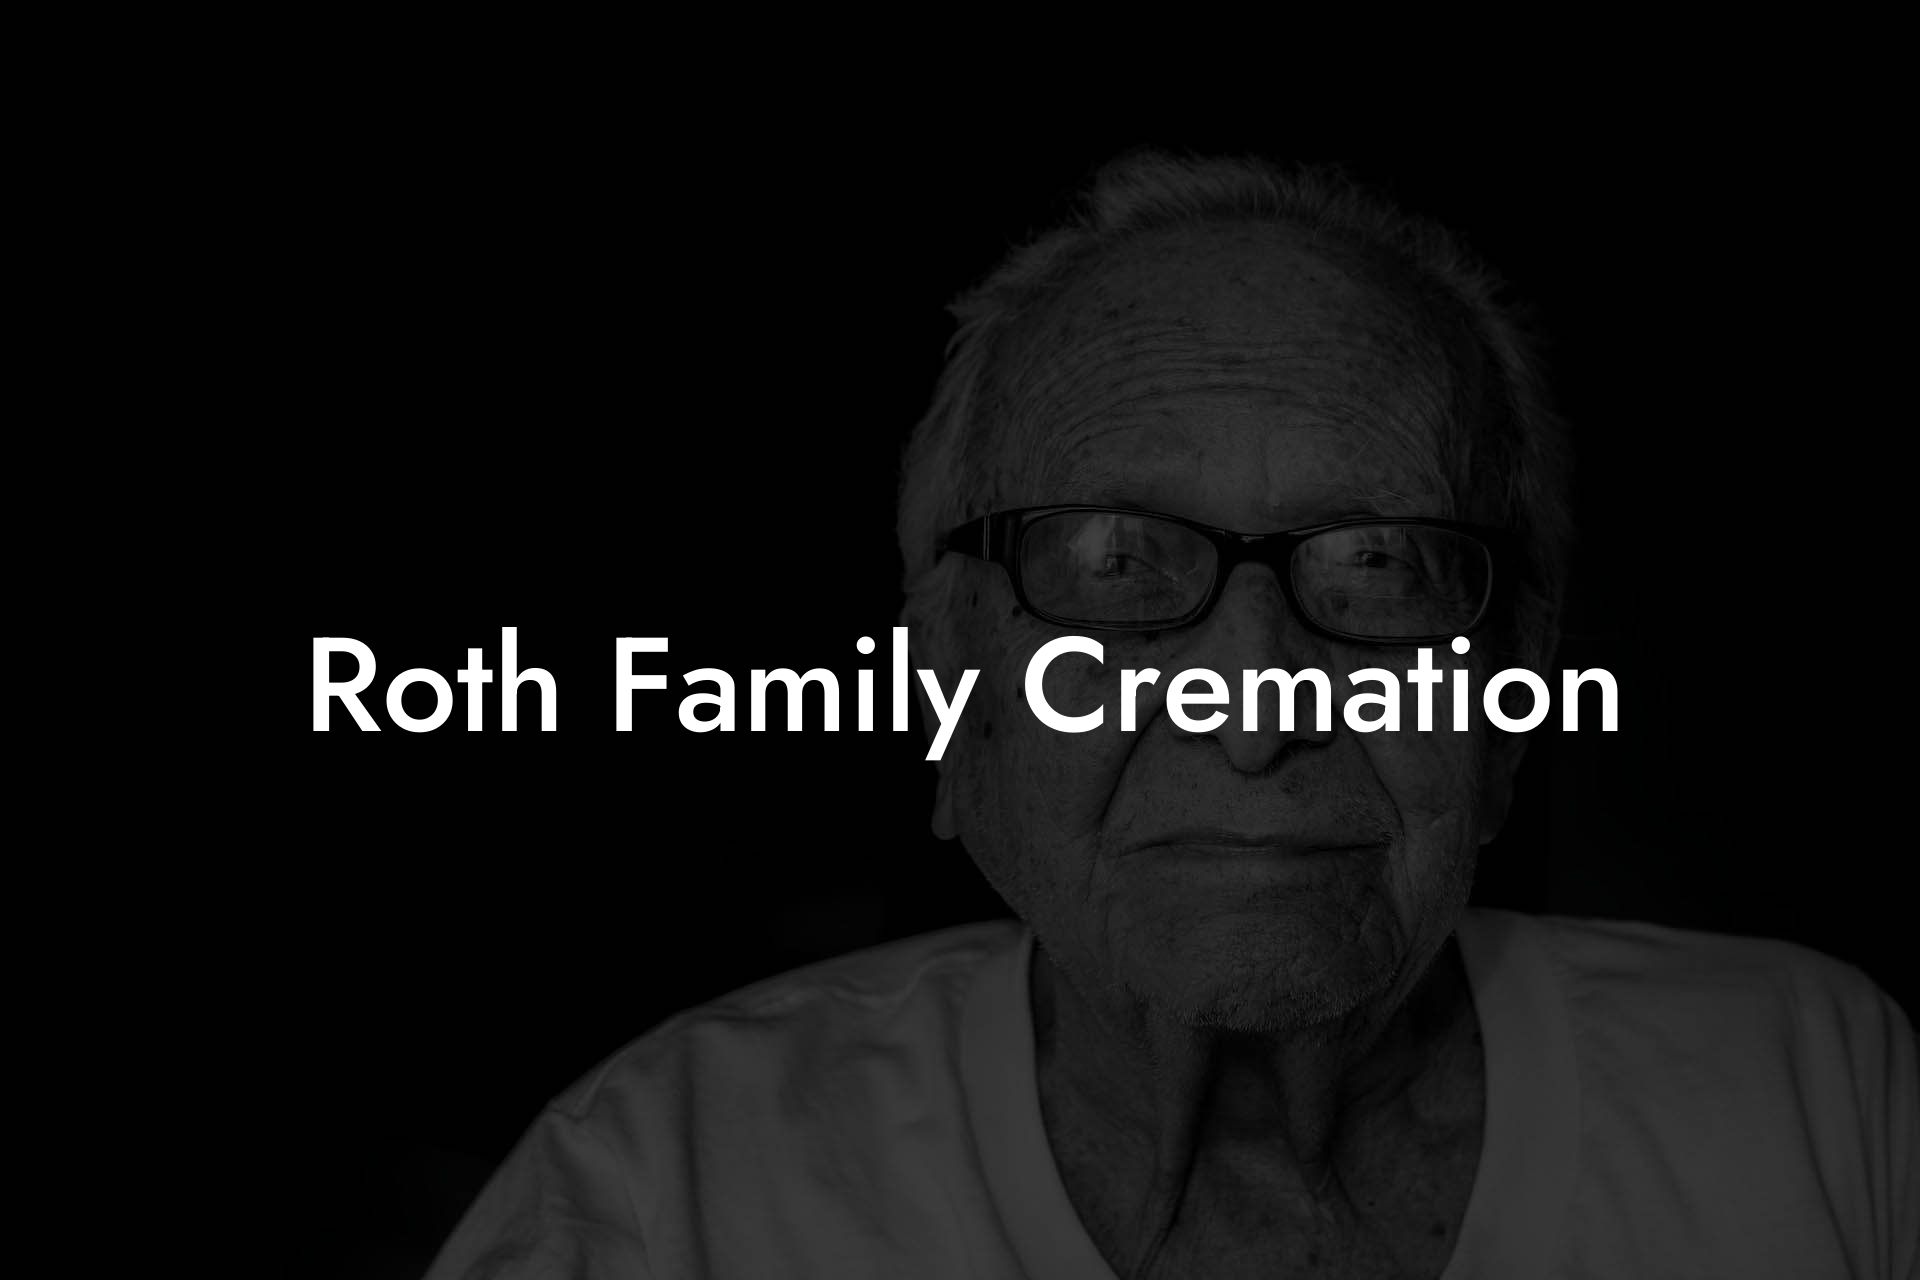 Roth Family Cremation